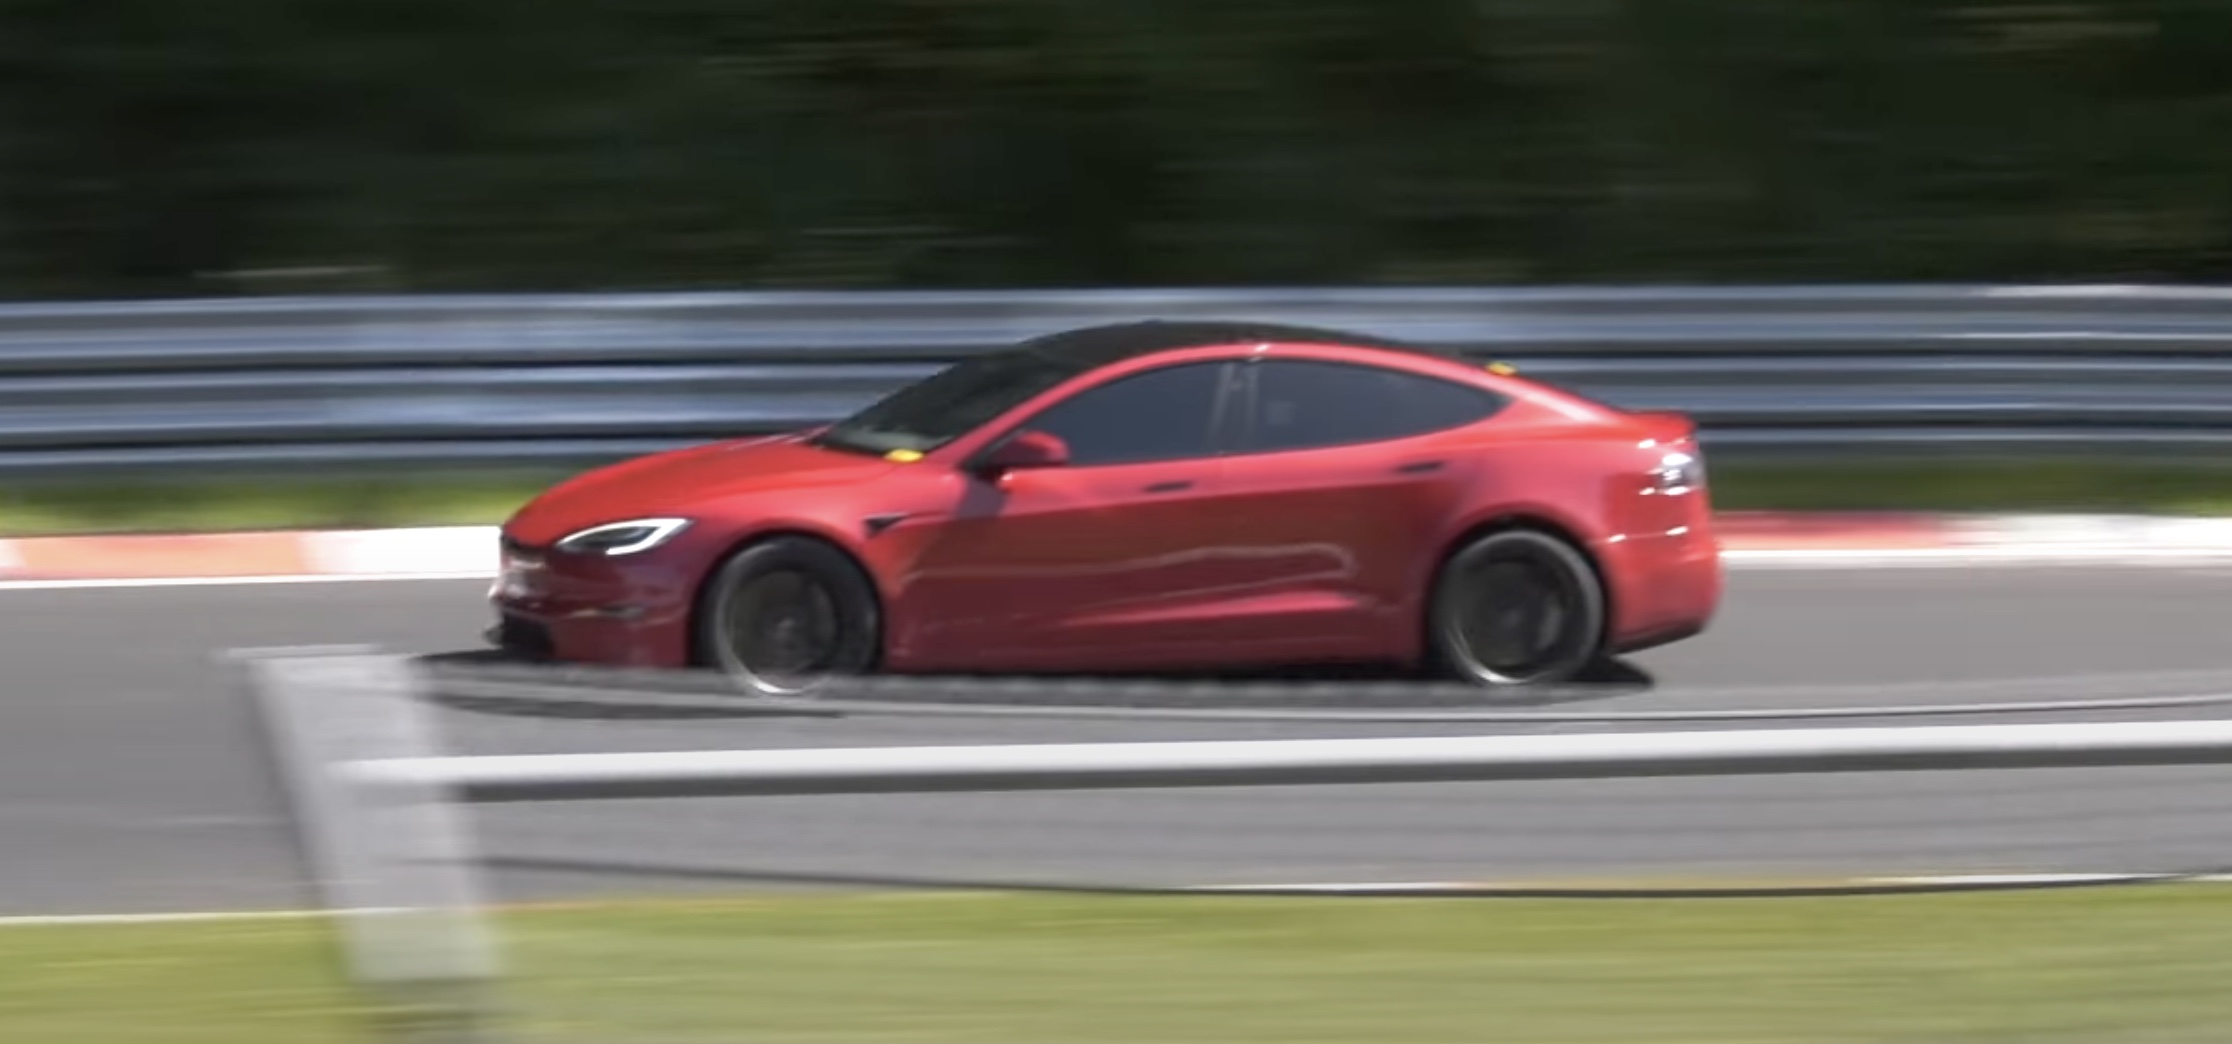 vocaal Isaac Articulatie Tesla Model S Plaid laps Nürburgring in 7:35.579, production electric  record - Electrek